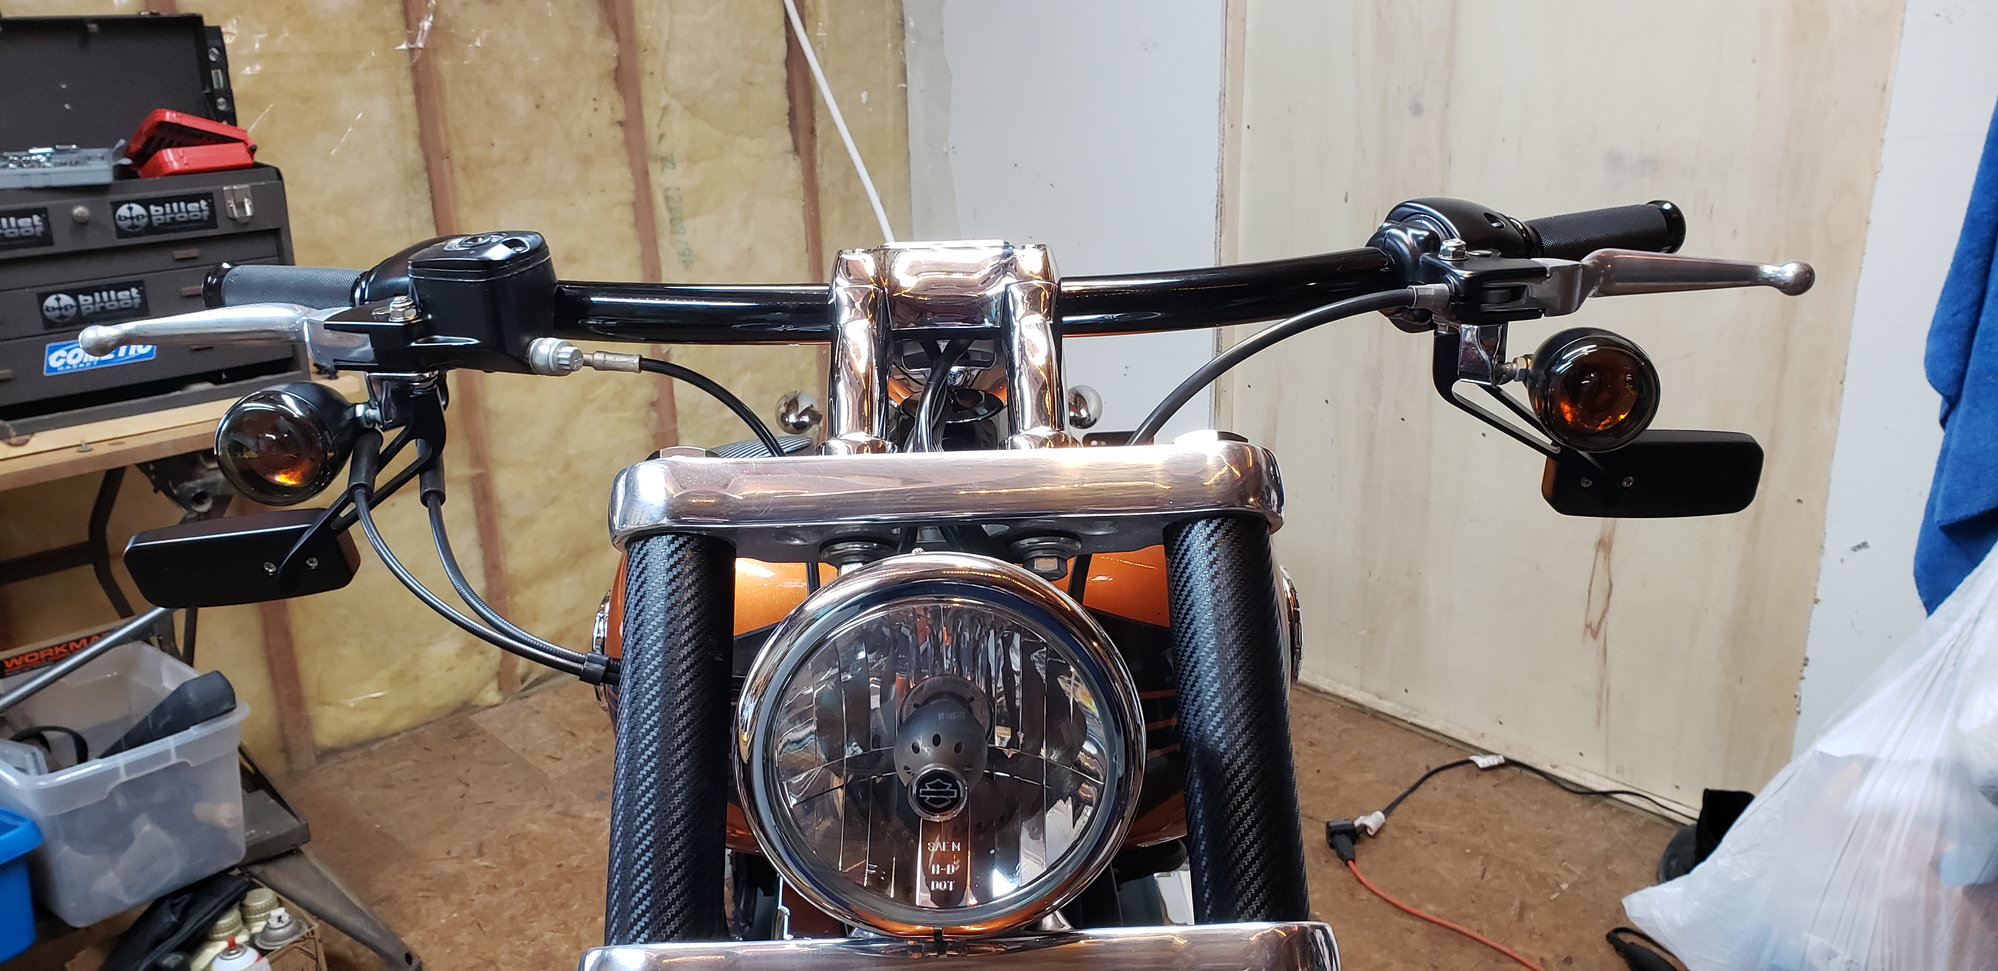 Flipped Mirrors For 13 17 Breakout Harley Davidson Forums